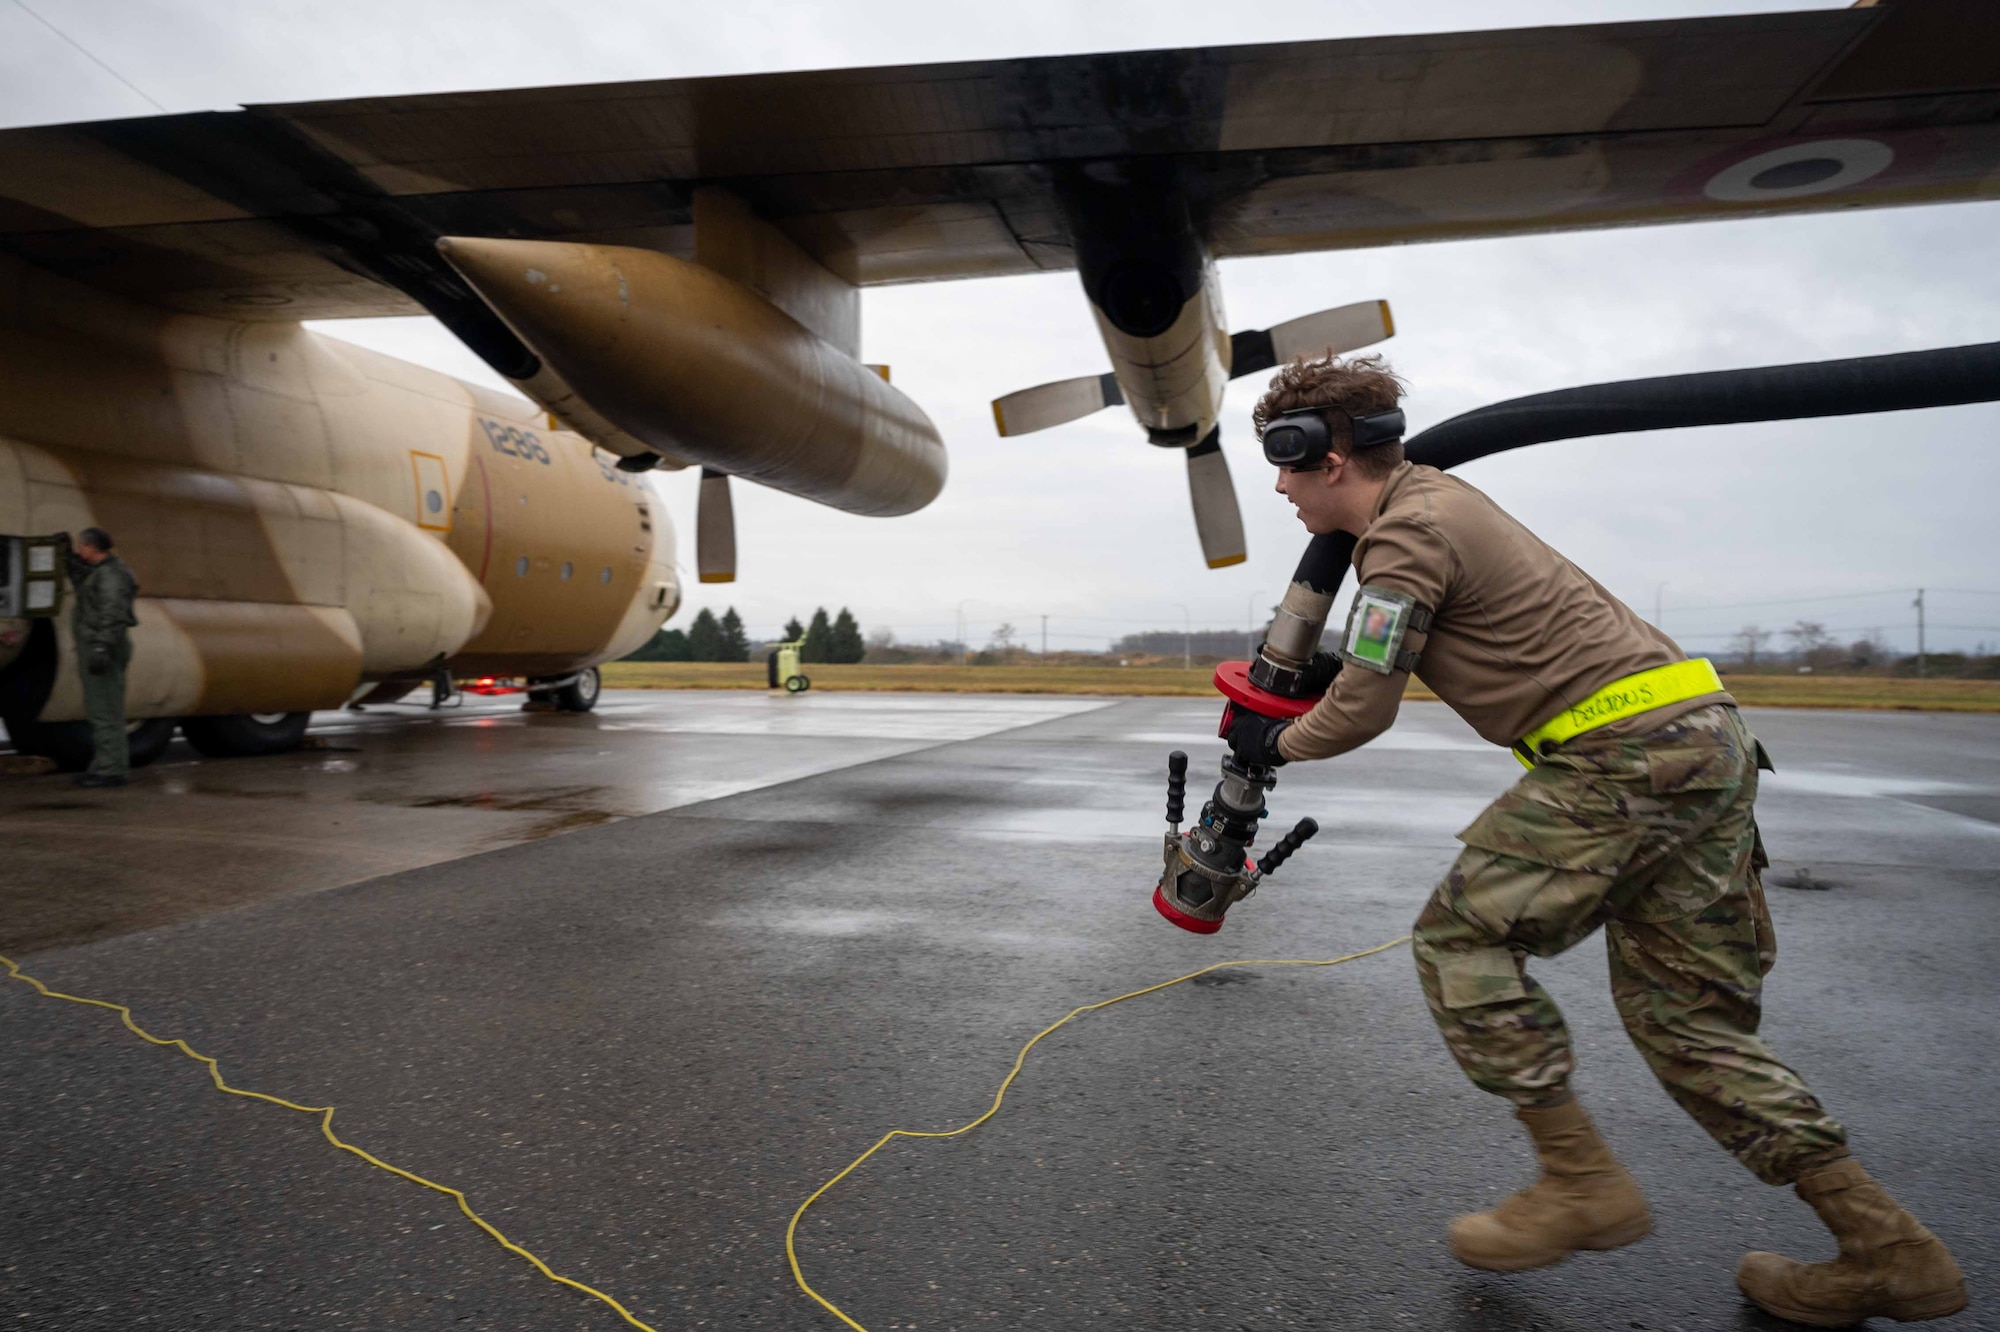 Airman 1st Class Dalton Settlemire, 436th Logistics Readiness Squadron fuels distribution operator, prepares to refuel an Egyptian Air Force C-130 Hercules during a foreign military sales mission at Dover Air Force Base, Delaware, Dec. 11, 2021. The United States and Egypt share a strong partnership based on mutual interest in Middle East peace and stability, economic opportunity and regional security. Due to its strategic location, Dover AFB supports approximately $3.5 billion worth of foreign military sales annually. (U.S. Air Force photo by Senior Airman Faith Schaefer) (This photo has been altered for security purposes by blurring out identification badges.)